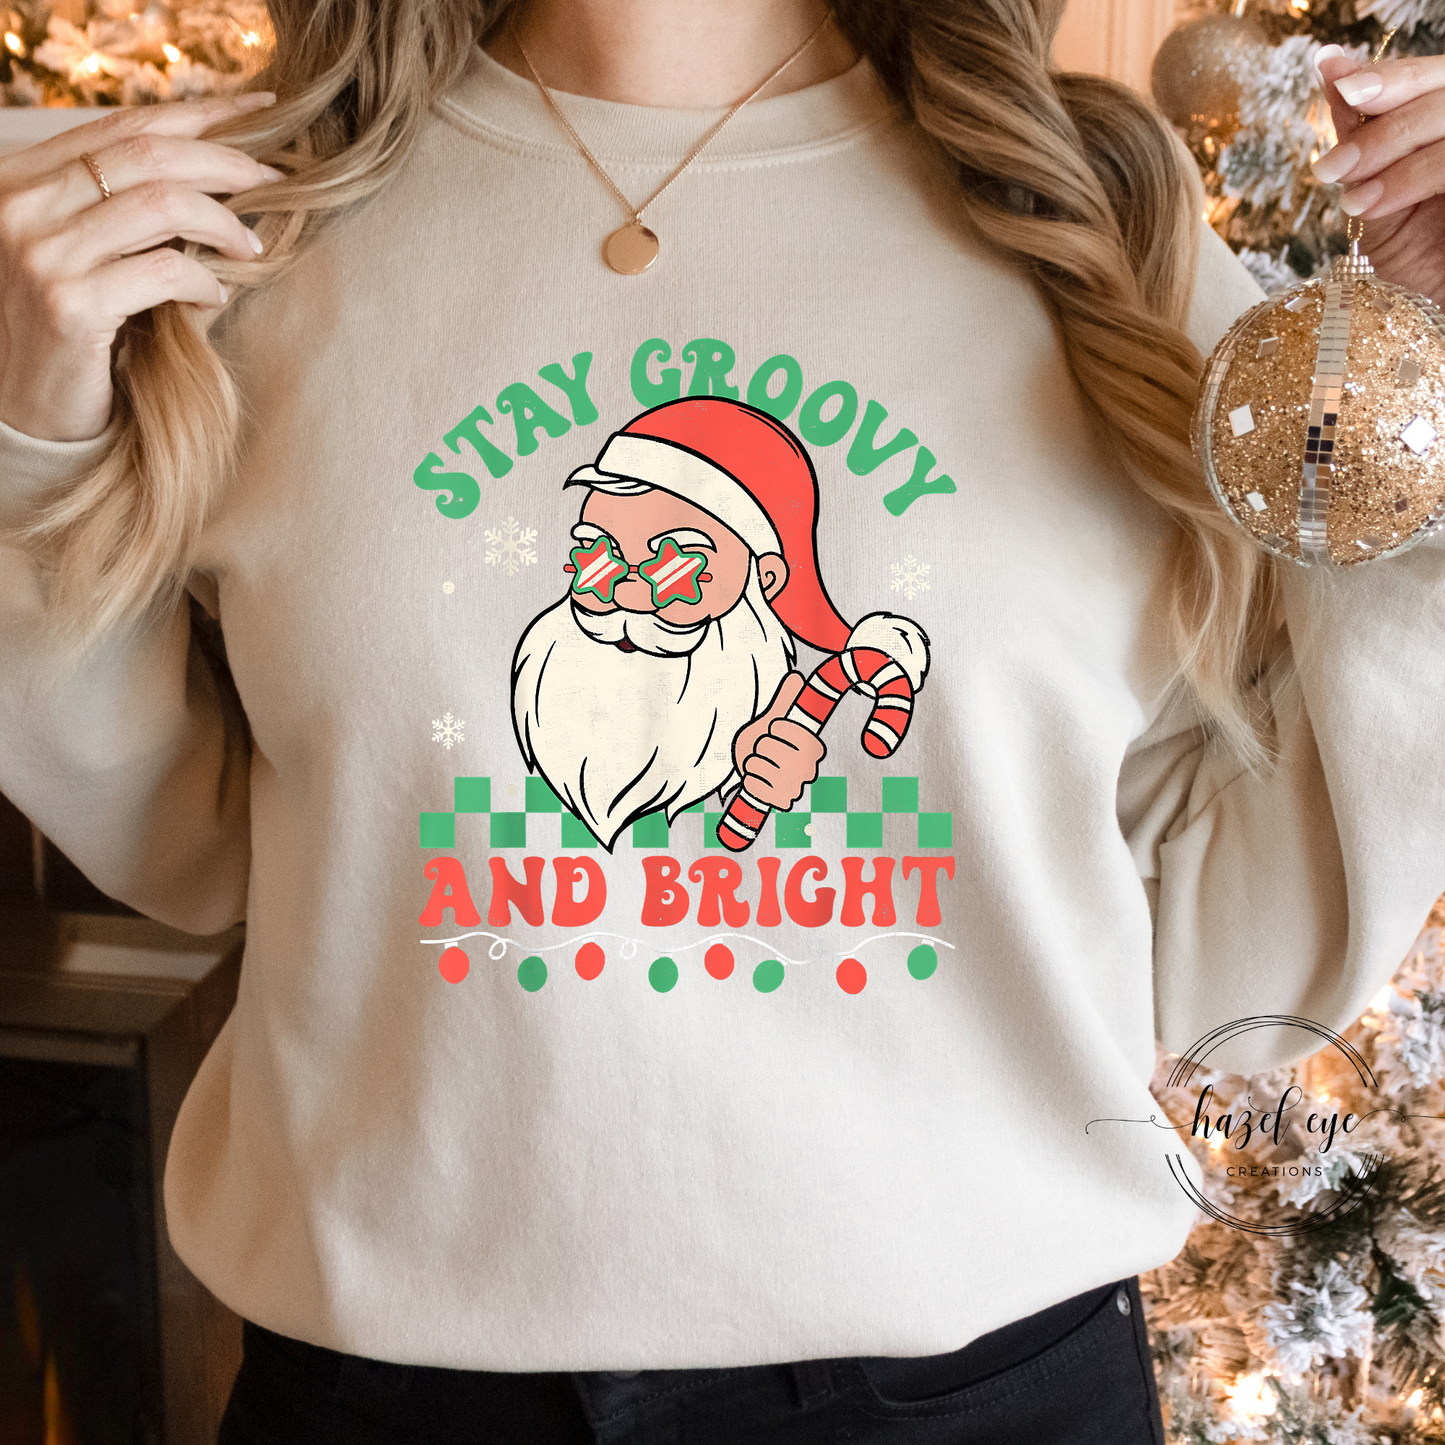 Stay groovy and bright santa